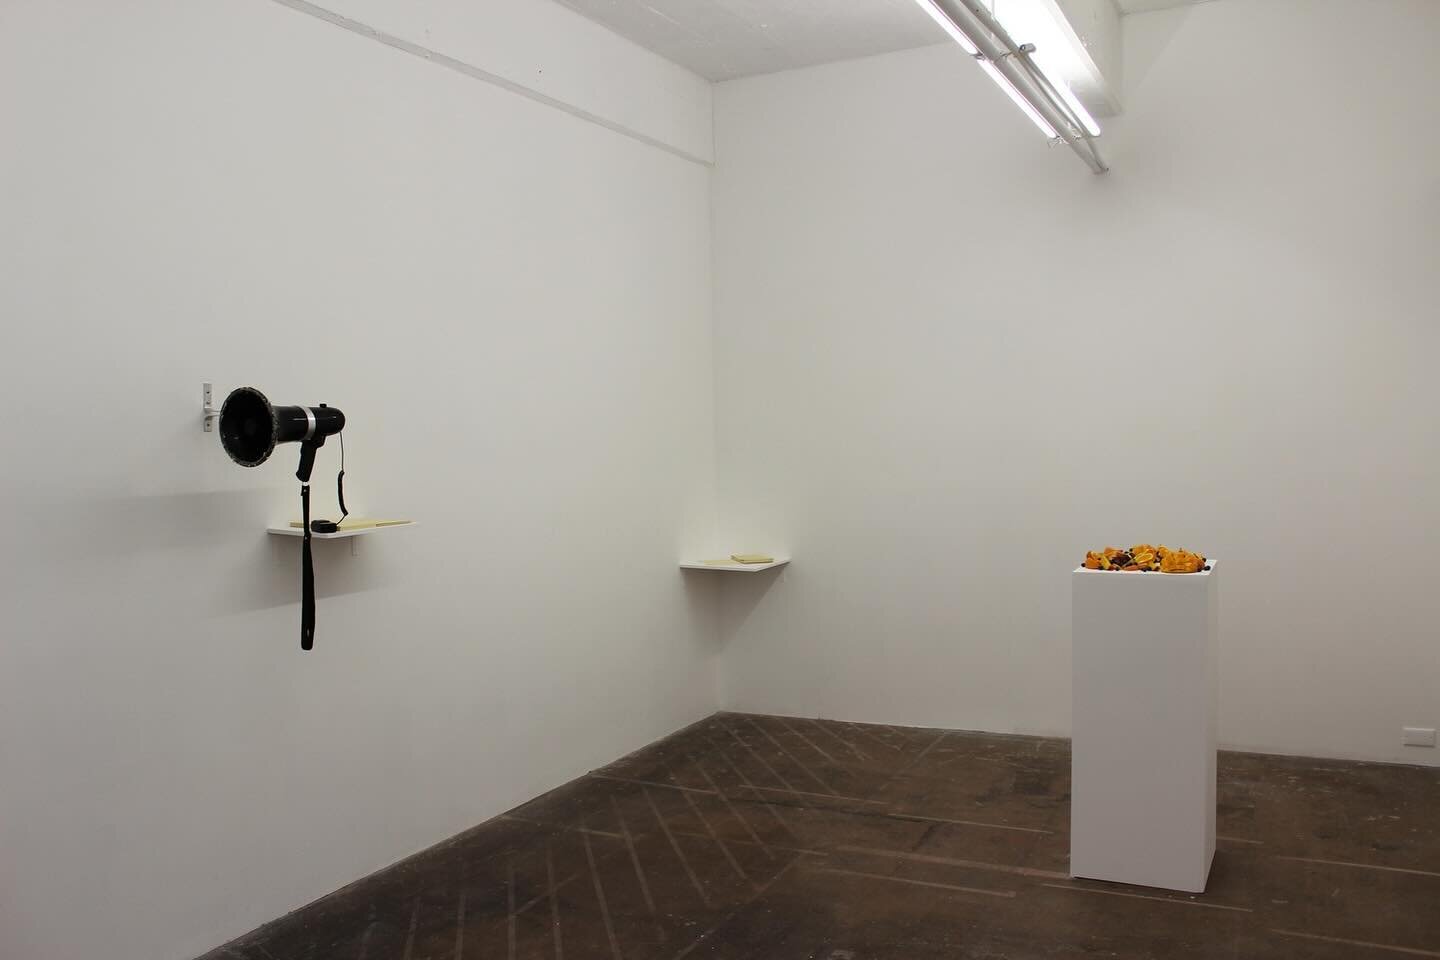 &lsquo;Actions for Sensory Disruption&rsquo;, 2014-2015
durational performance, artist book, megaphone, imperial leather soap, mango, orange, mandarin, peach, passion fruit, blueberries, installation @busprojects dimensions variable. 

Between late 2